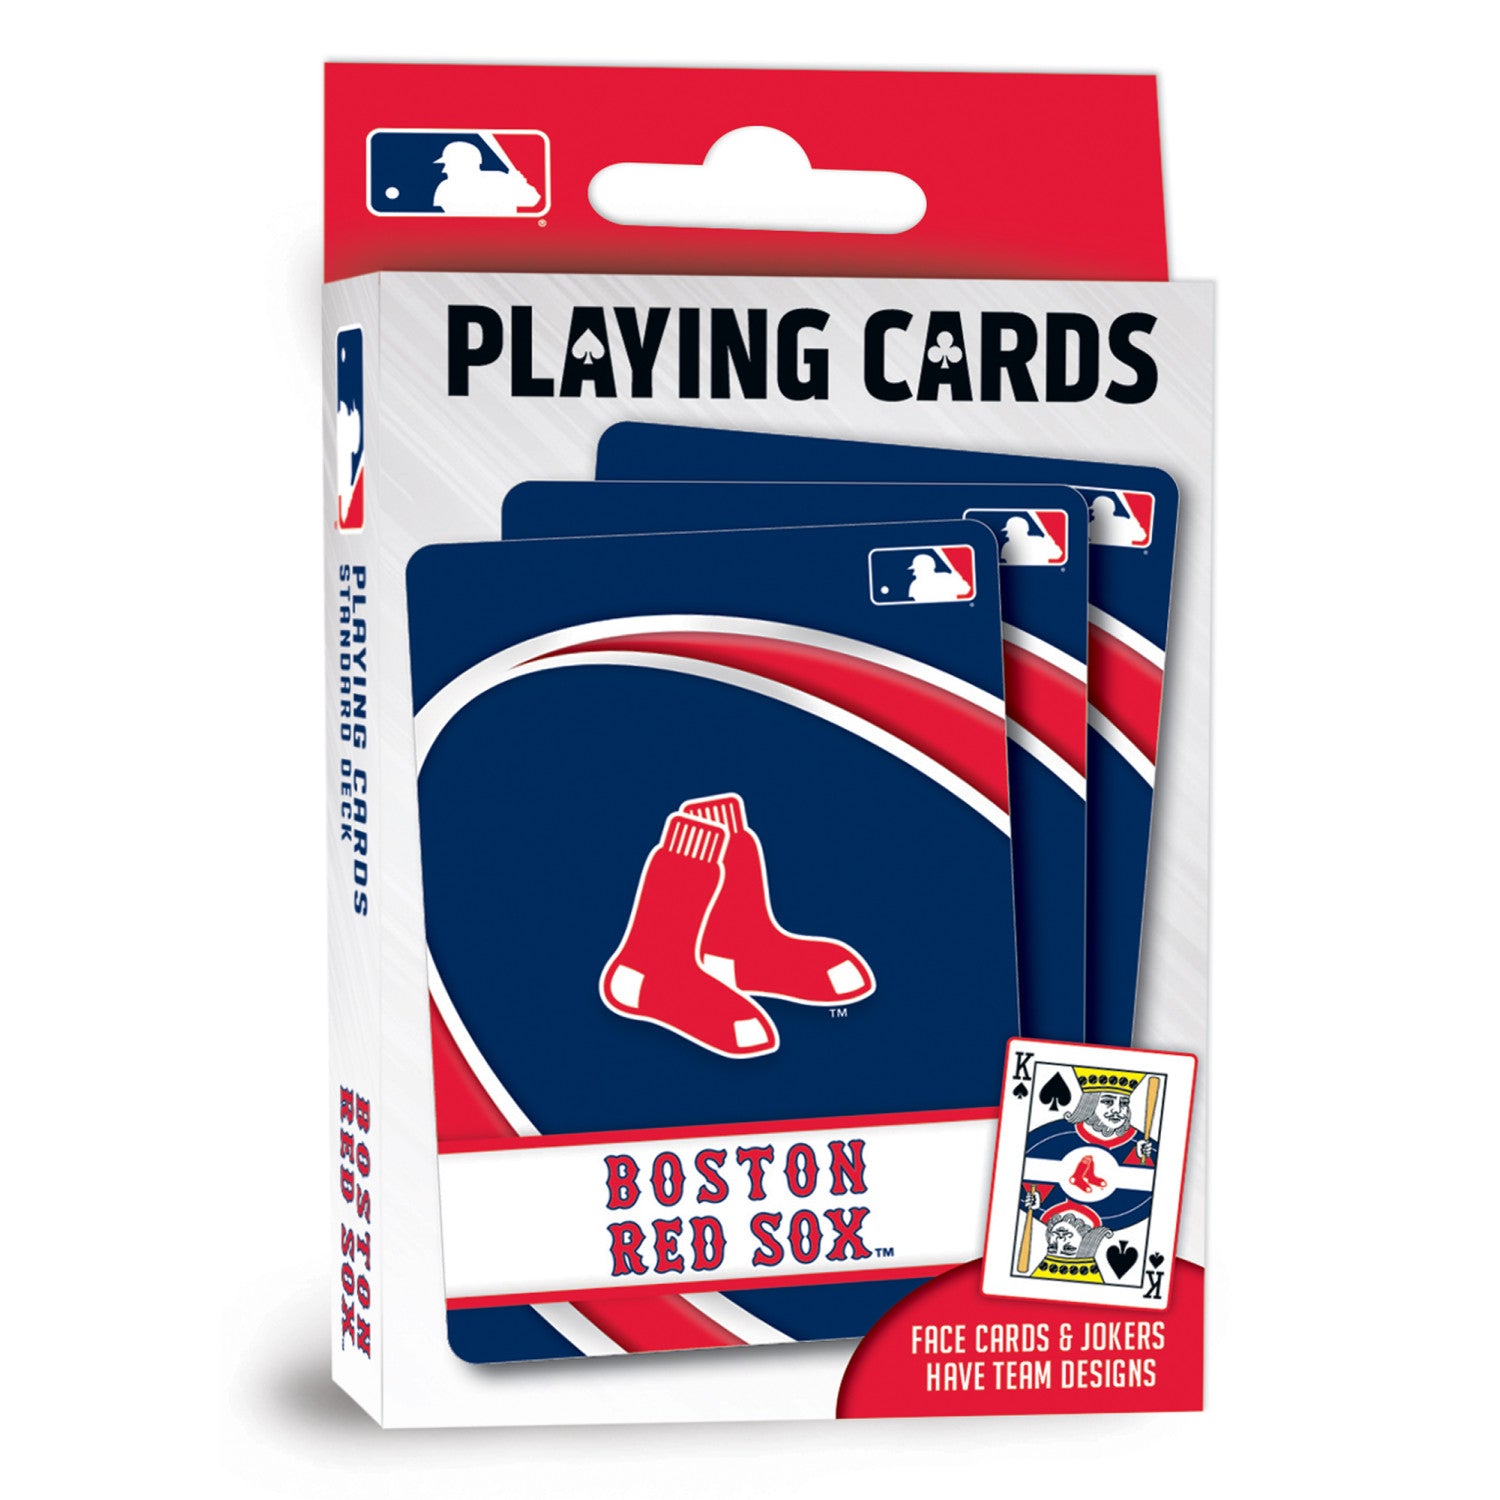 Boston Red Sox Playing Cards - 54 Card Deck